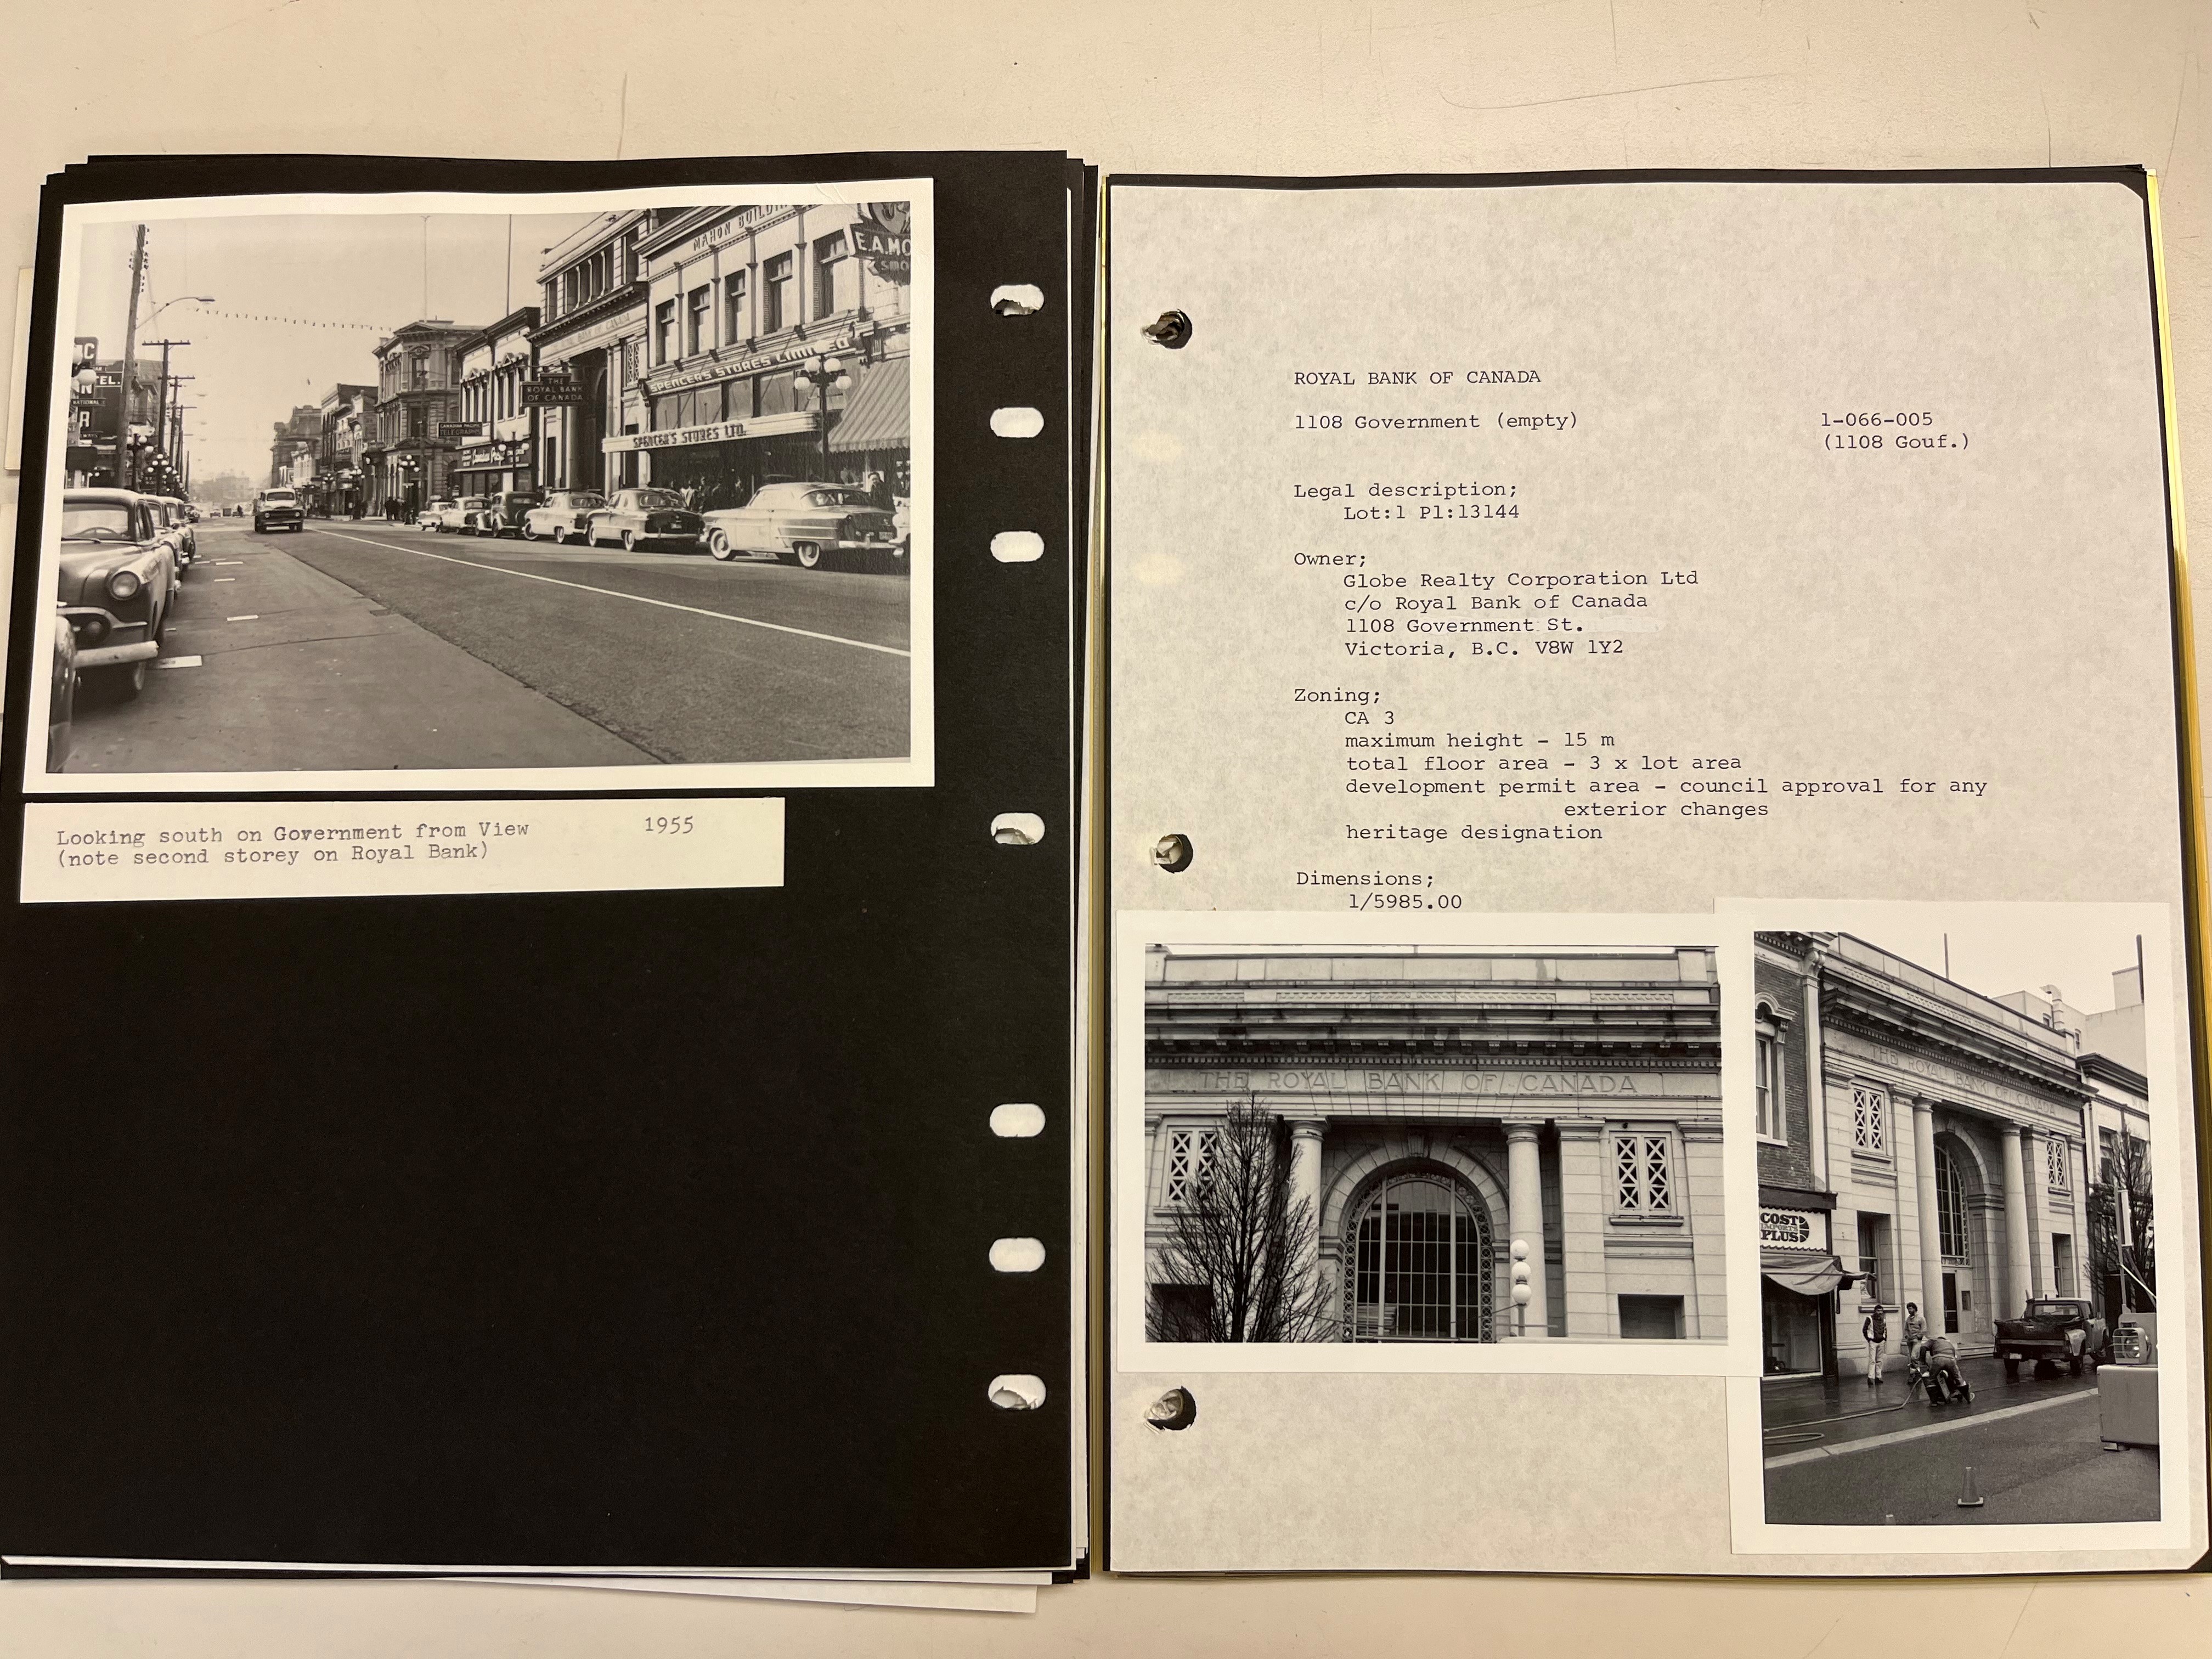 Images of the Royal Bank on Government Street in Victoria, now Munro’s Books, in 1955 and c.1970 (GR-4119).